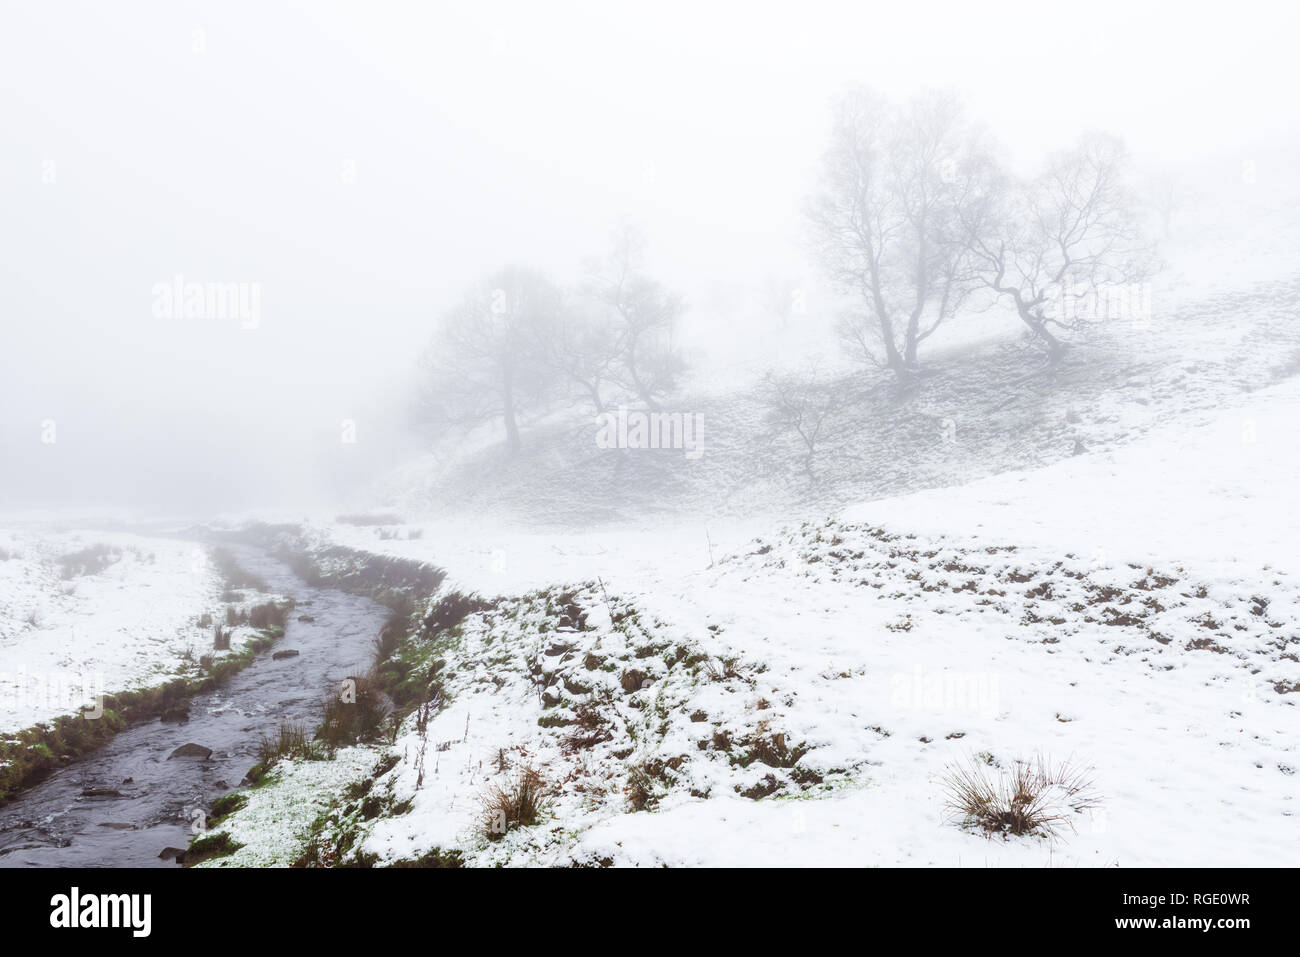 Wintry view of stream and trees in misty/foggy conditions Stock Photo